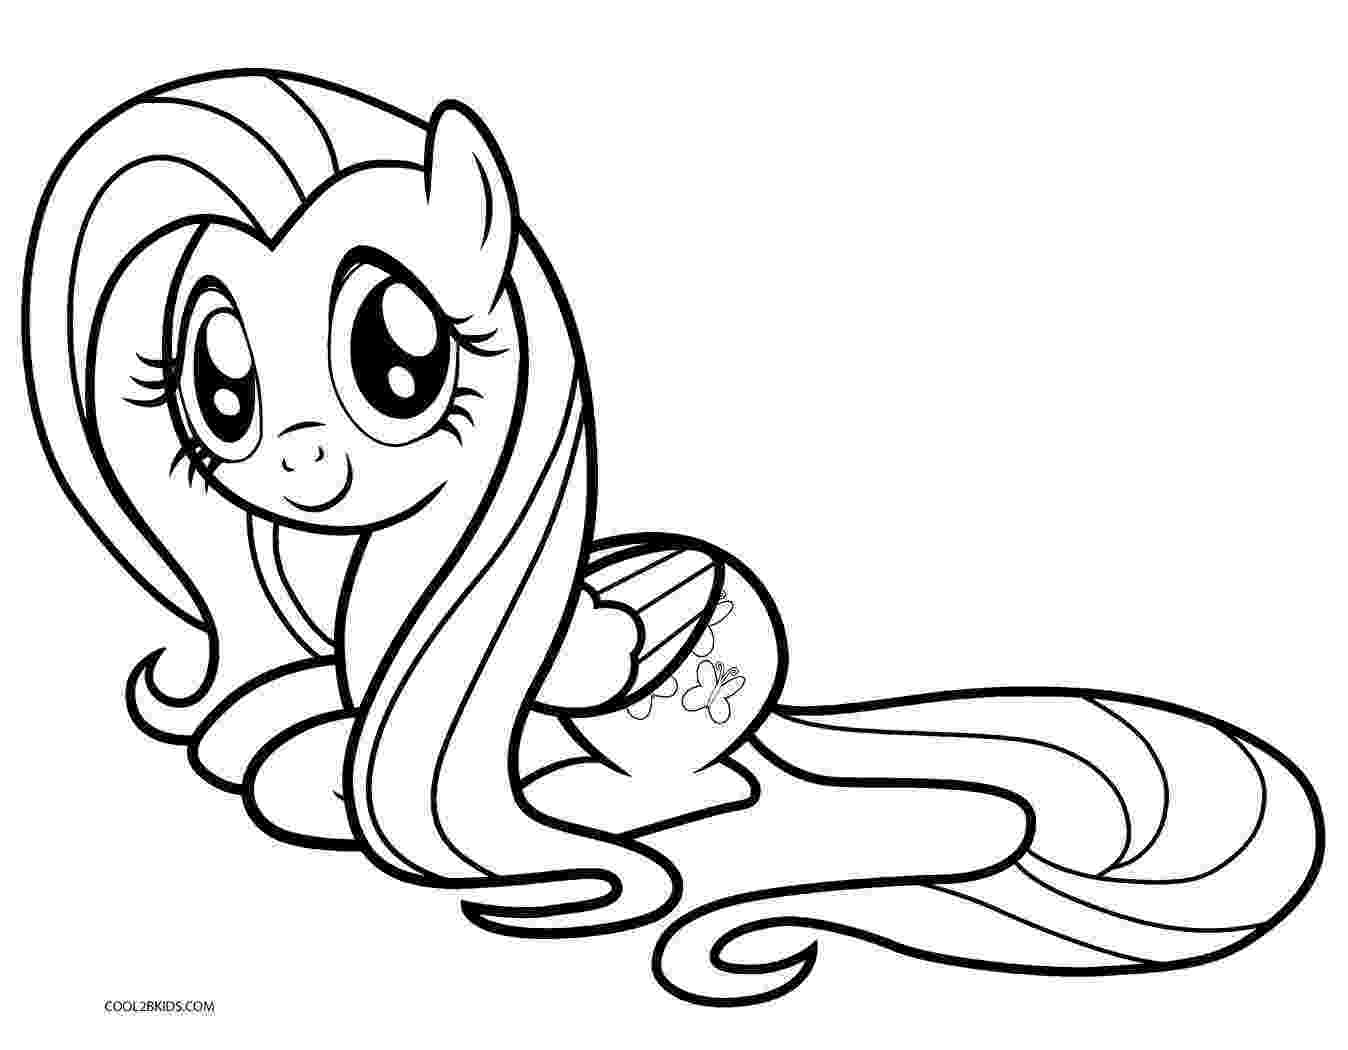 my little pony printables coloring pages my little pony christmas coloring pages to download and pages pony printables little coloring my 